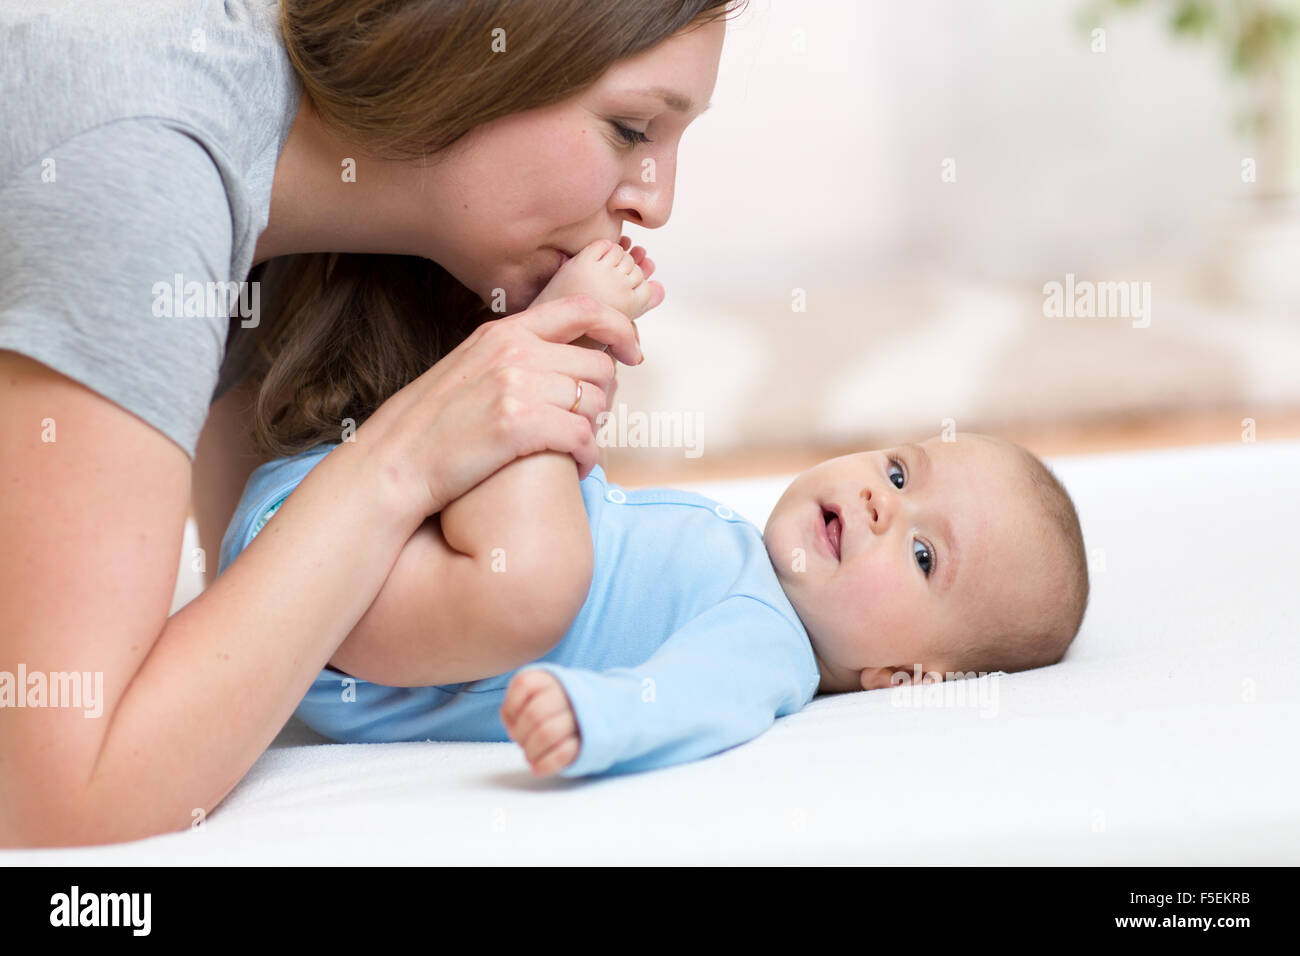 Mother kisses baby daughter feet while playing on a white bed Stock Photo